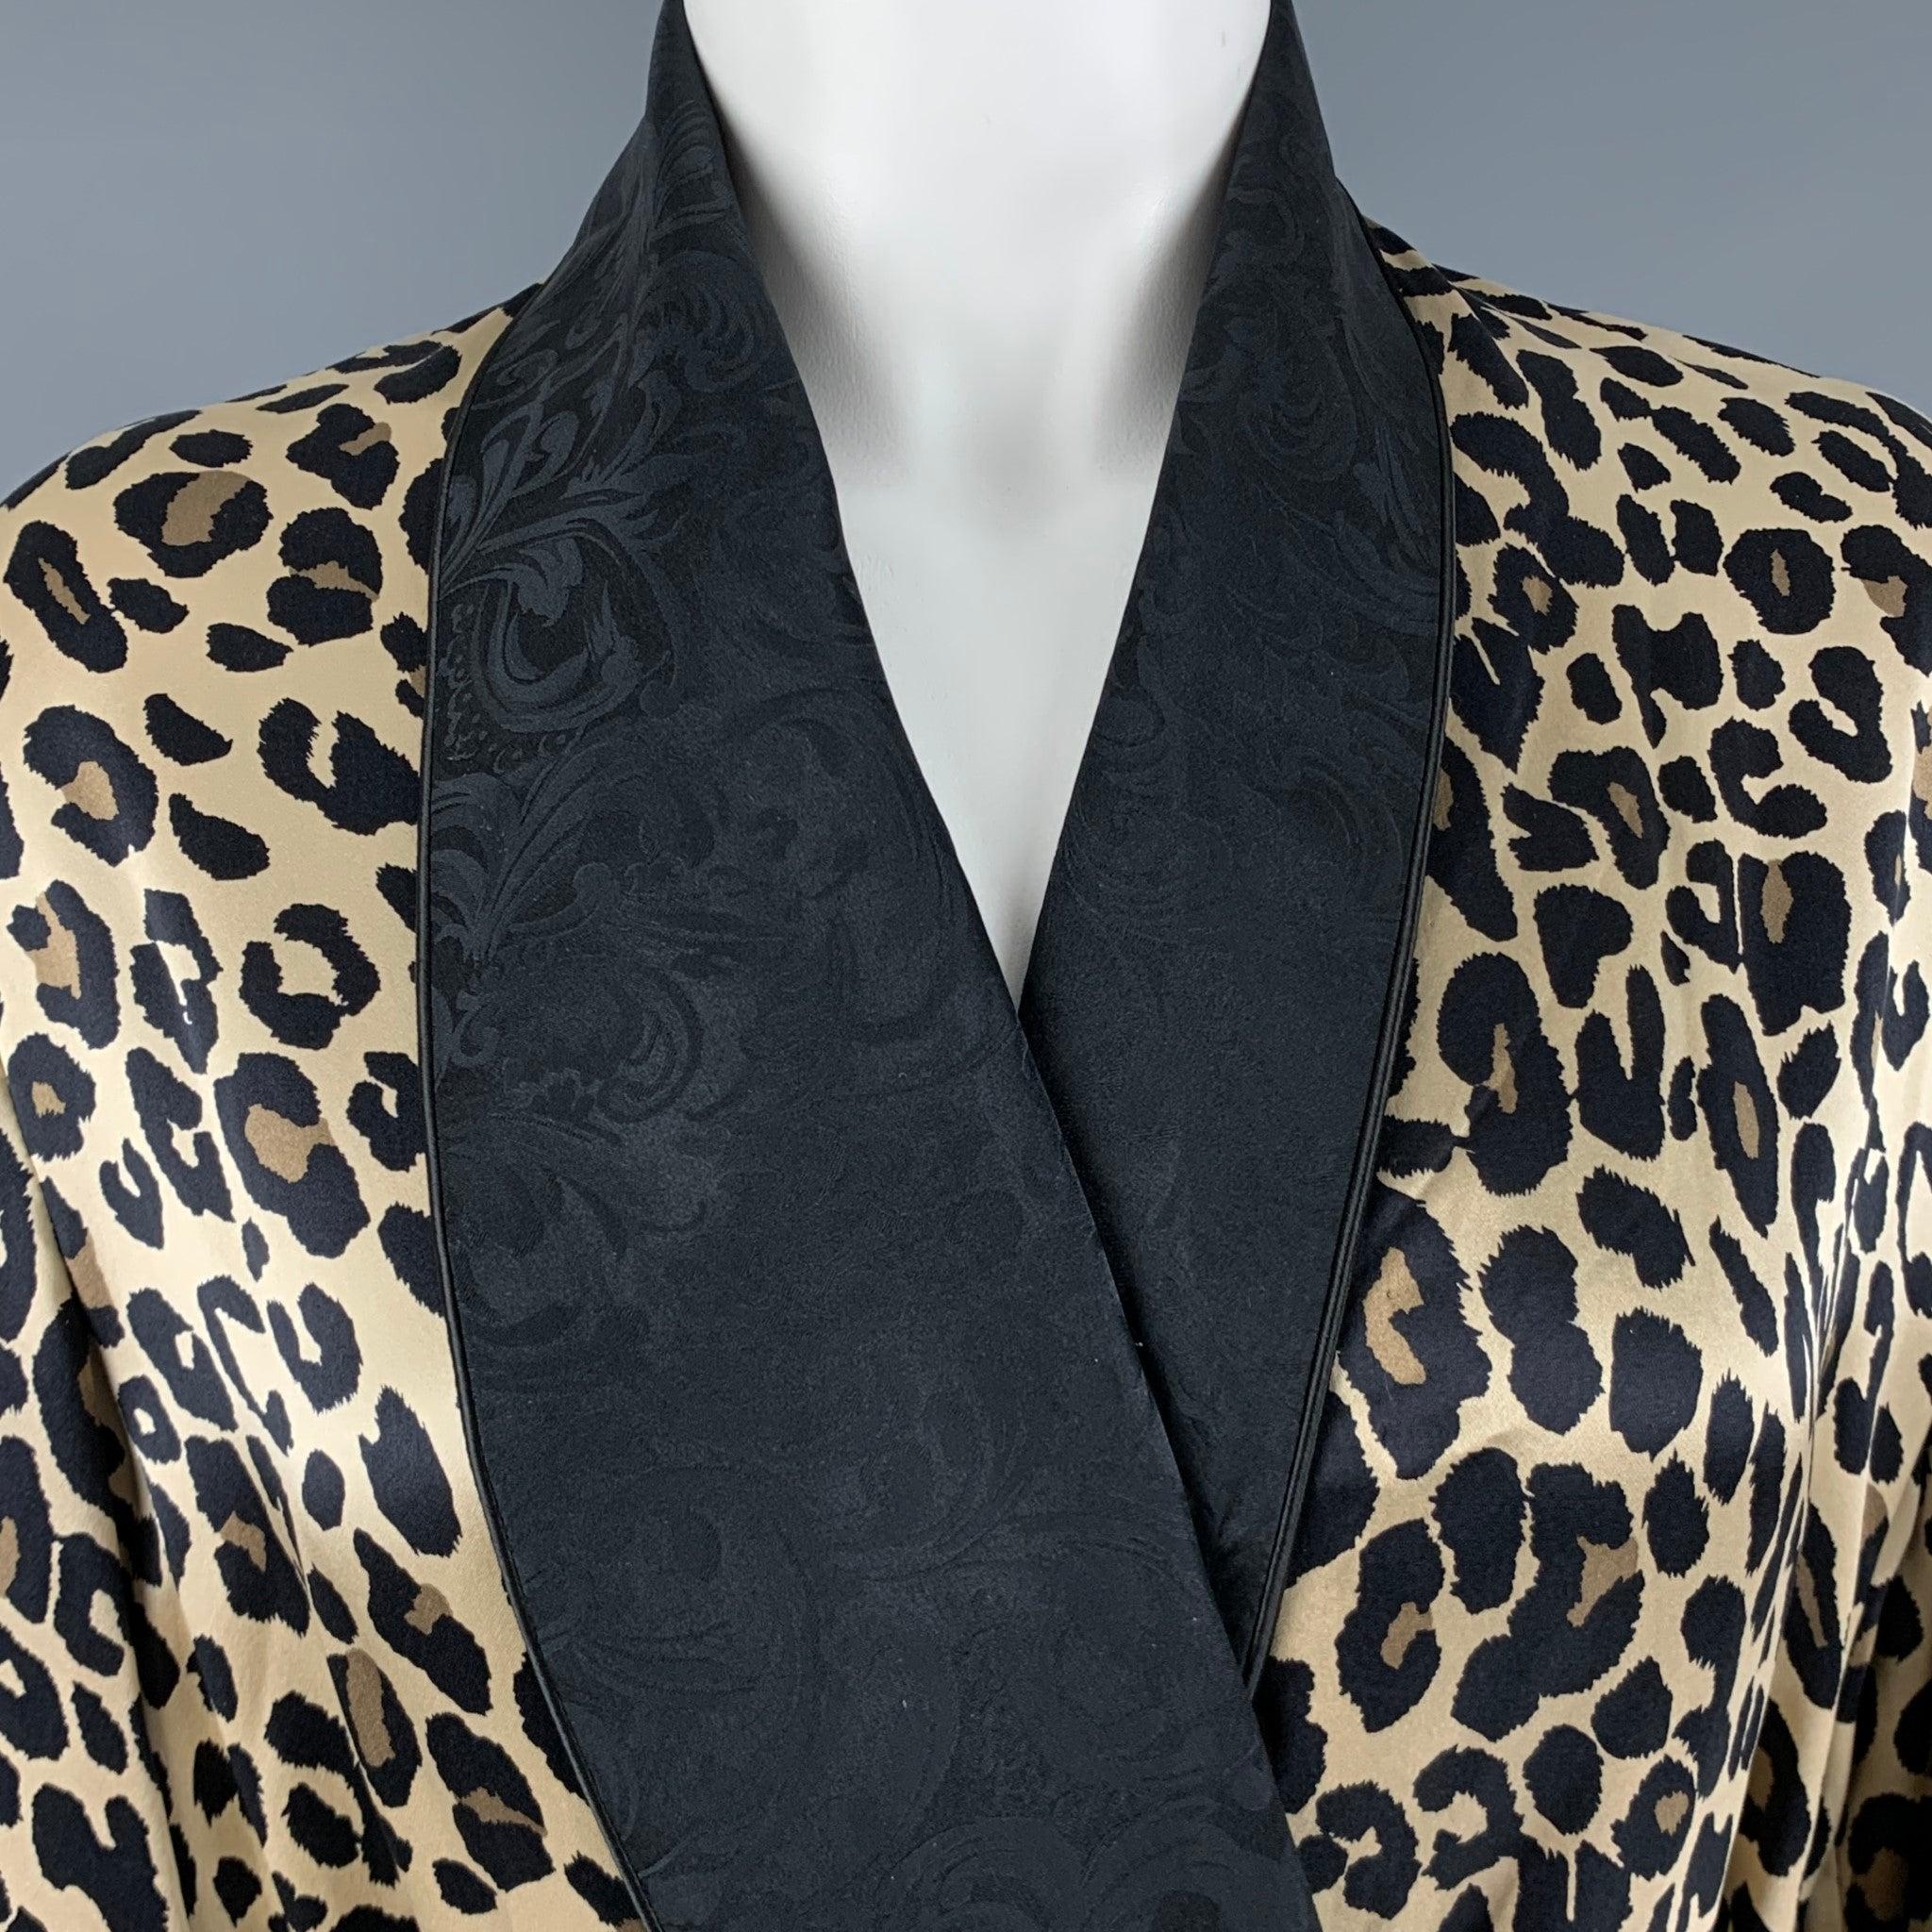 PAUL STUART bathrobe
in a black and beige silk fabric featuring animal print, black paisley contrast trim, and a belted style. Made in USA.Very Good Pre-Owned Condition. Minor mark. 

Marked:   M 

Measurements: 
 
Shoulder: 16.5 inches Bust: 40